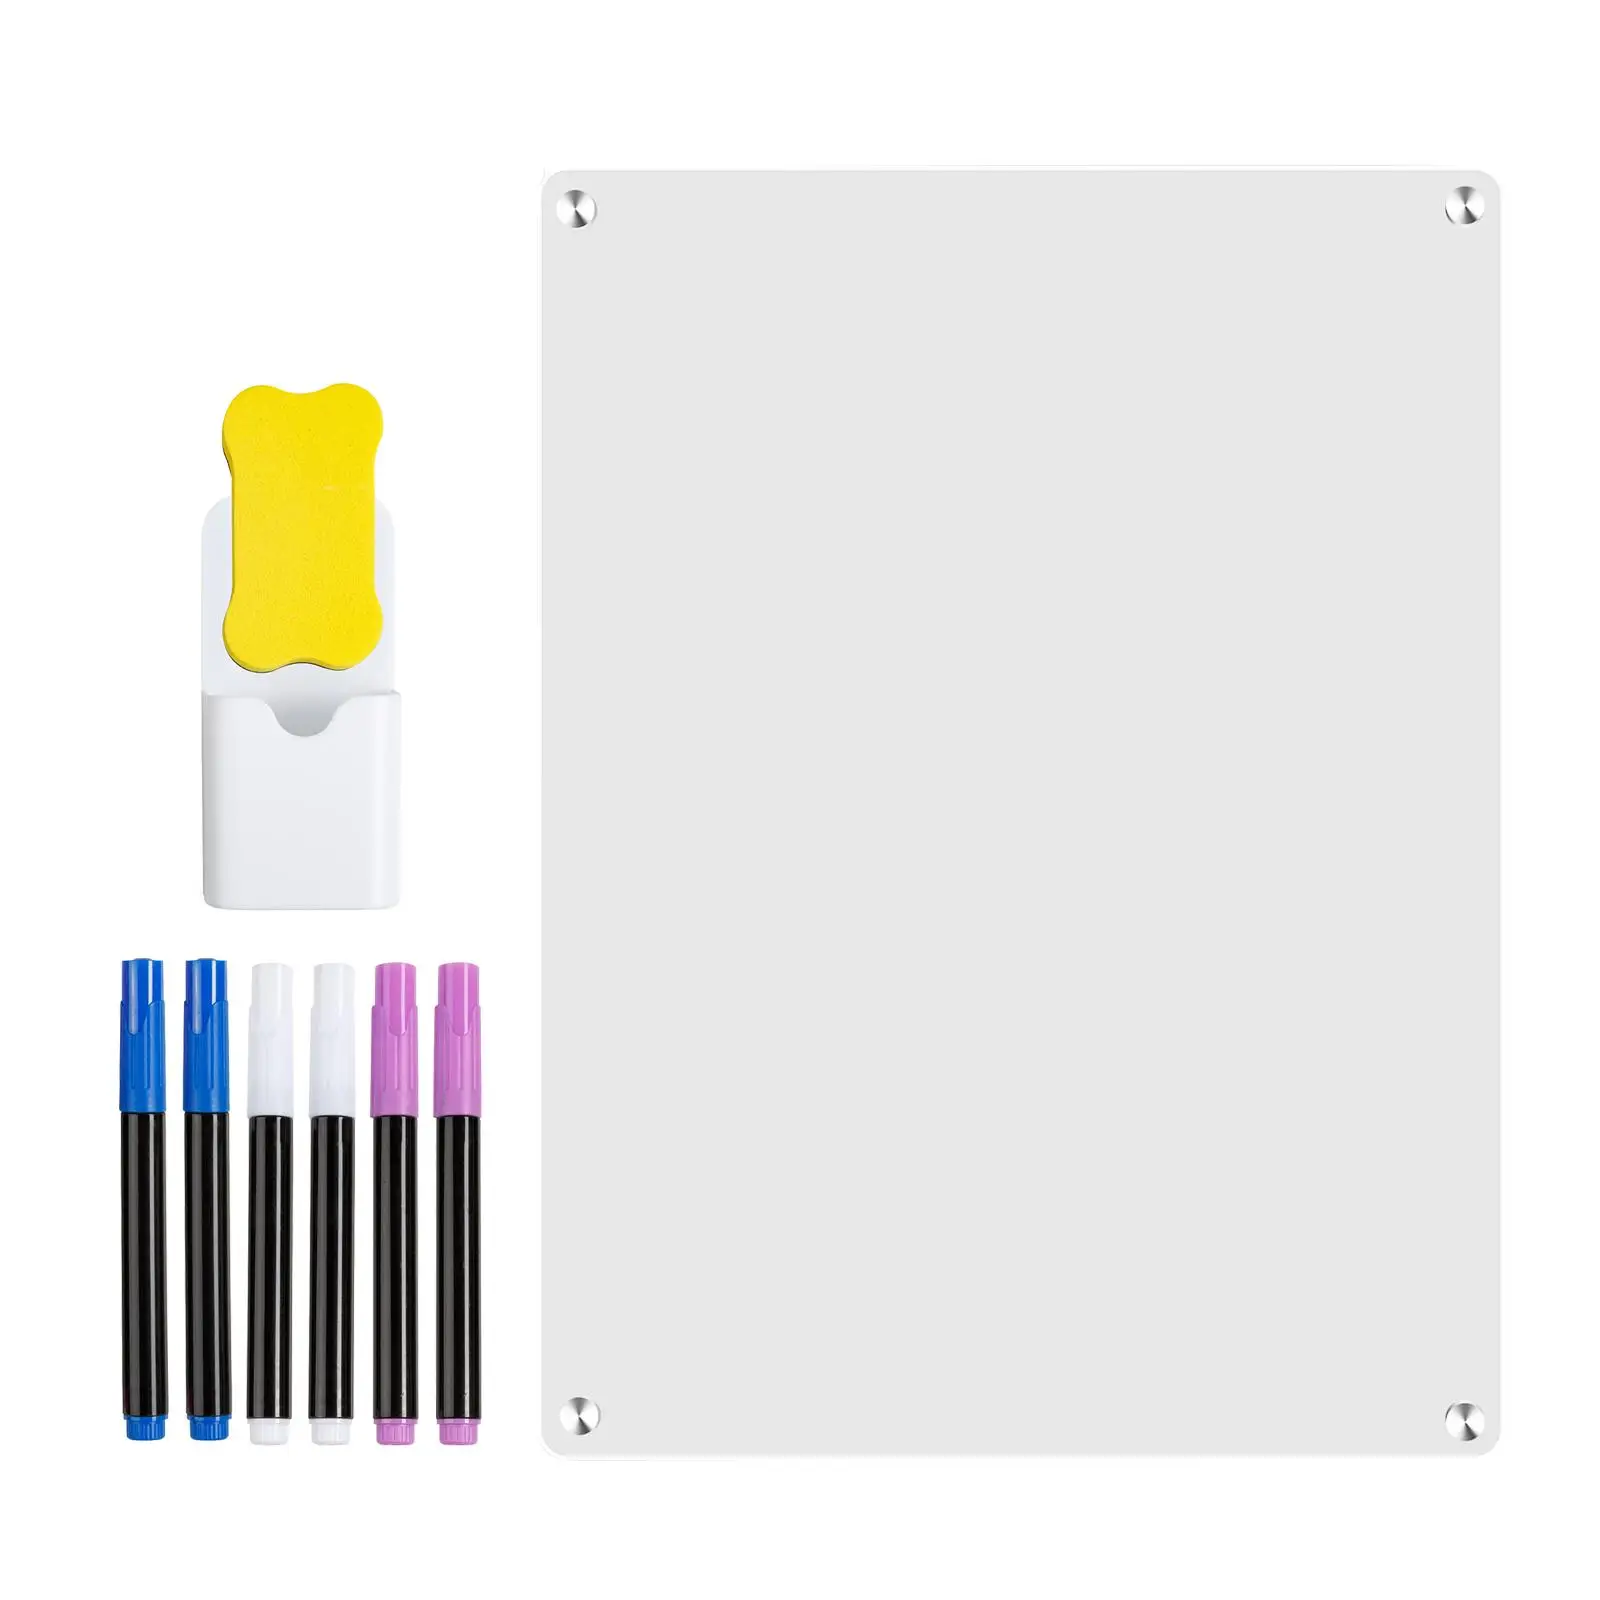 Dry Erase Board Clear Acrylic Magnetic Whiteboard with Markers for Refrigerator Home Tasks Important Dates Conference Room